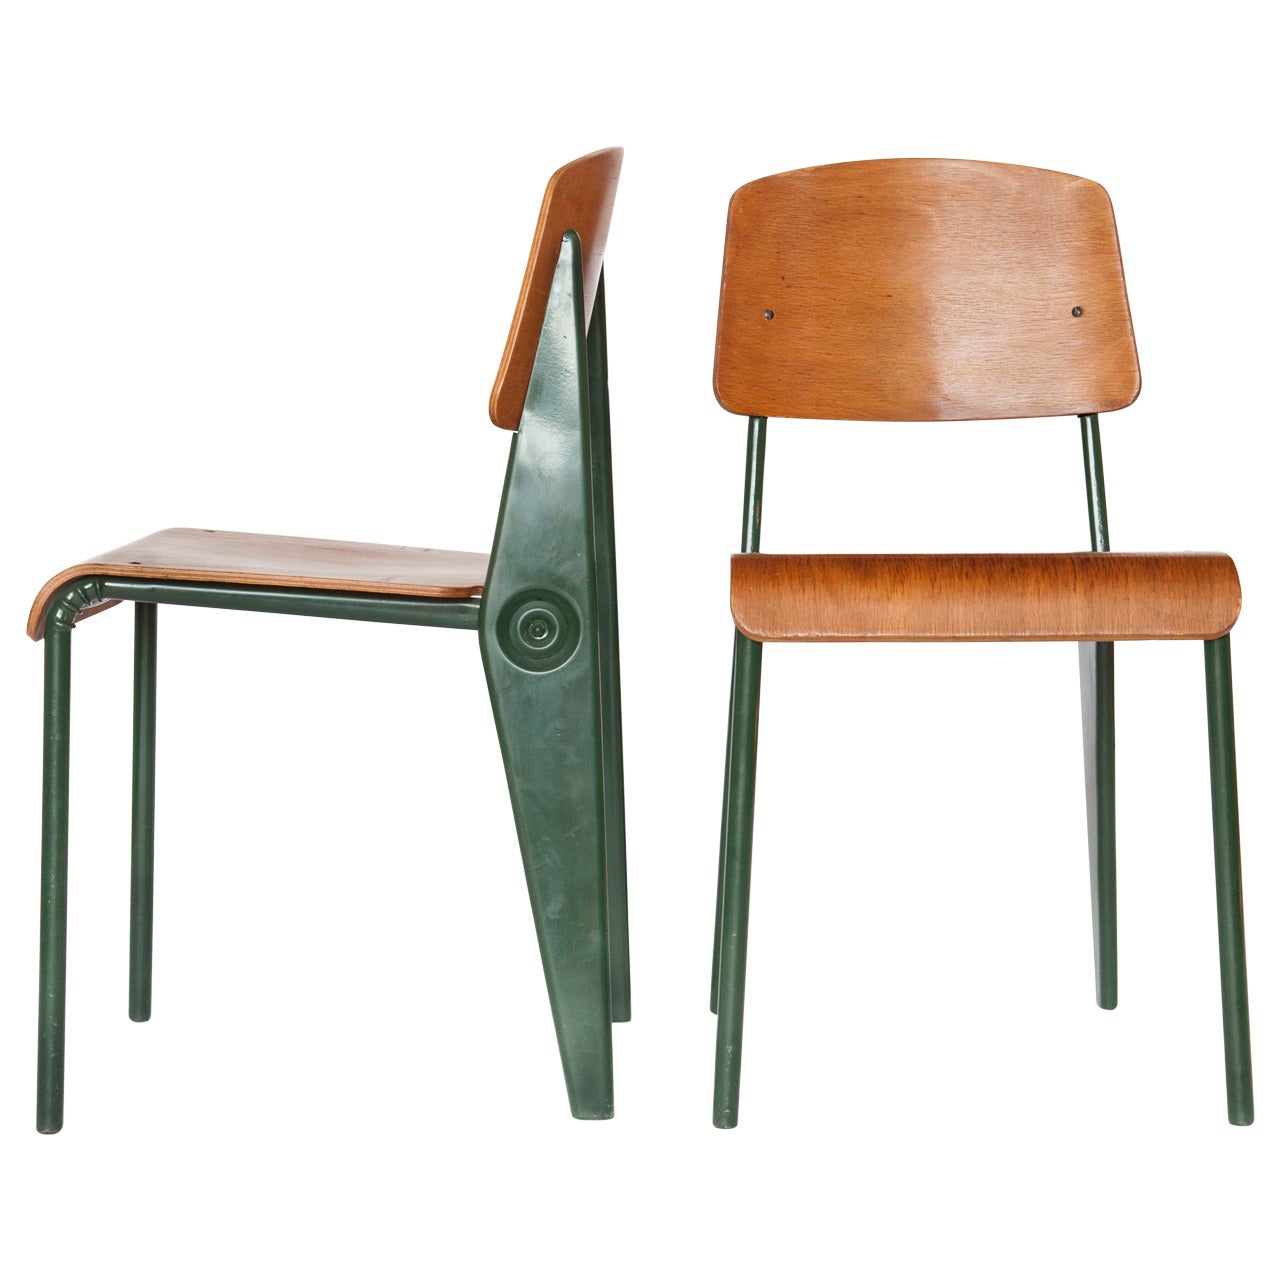 Pair of Rare Model No. 300 Demountable Chairs by Jean Prouvé